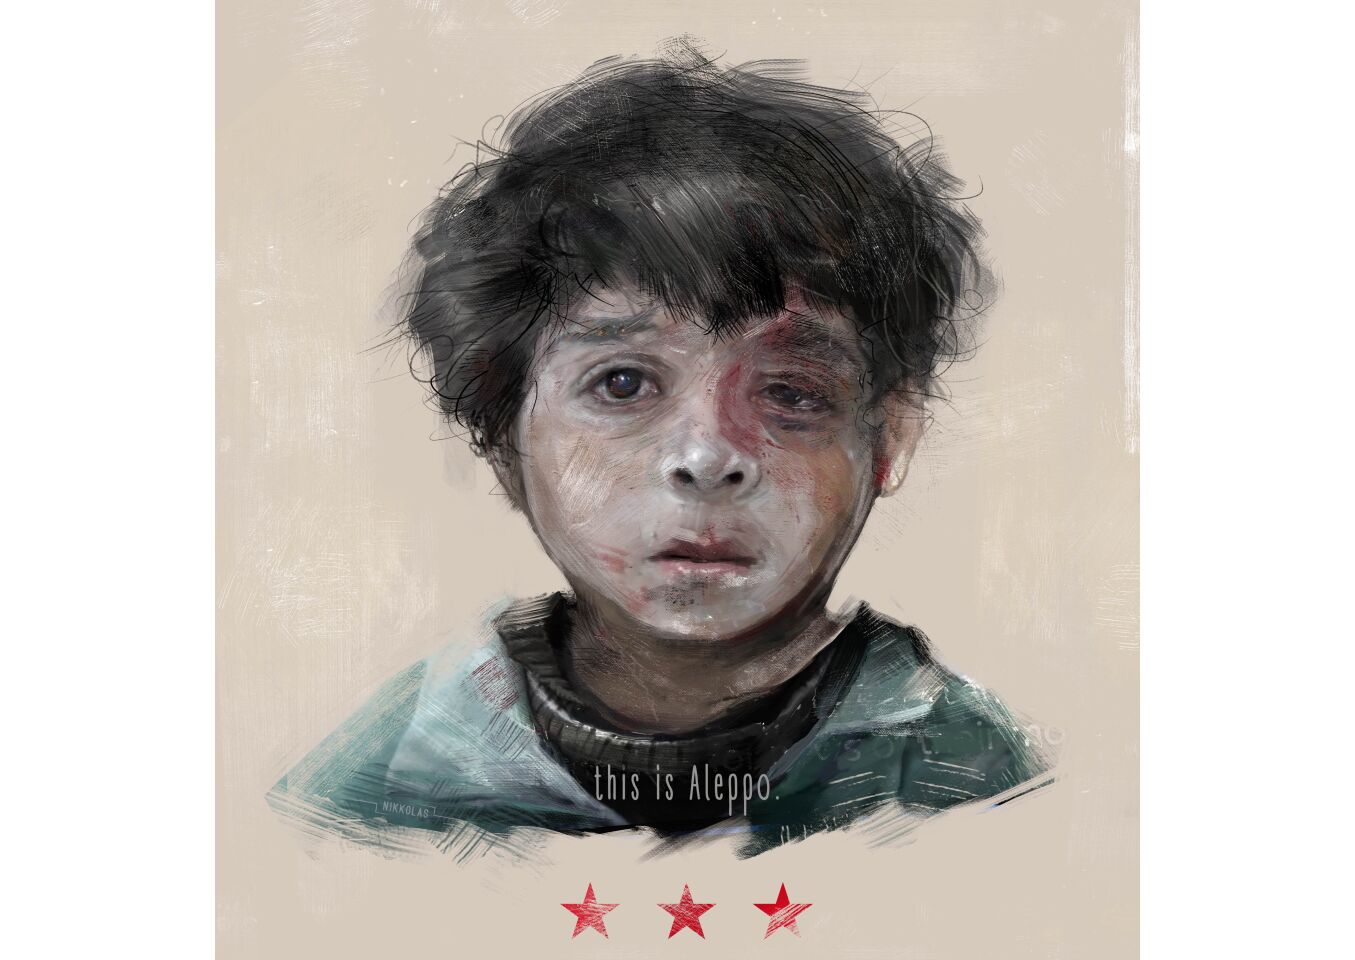 A portrait of a small child in Aleppo shocked many as they scrolled through their timelines.